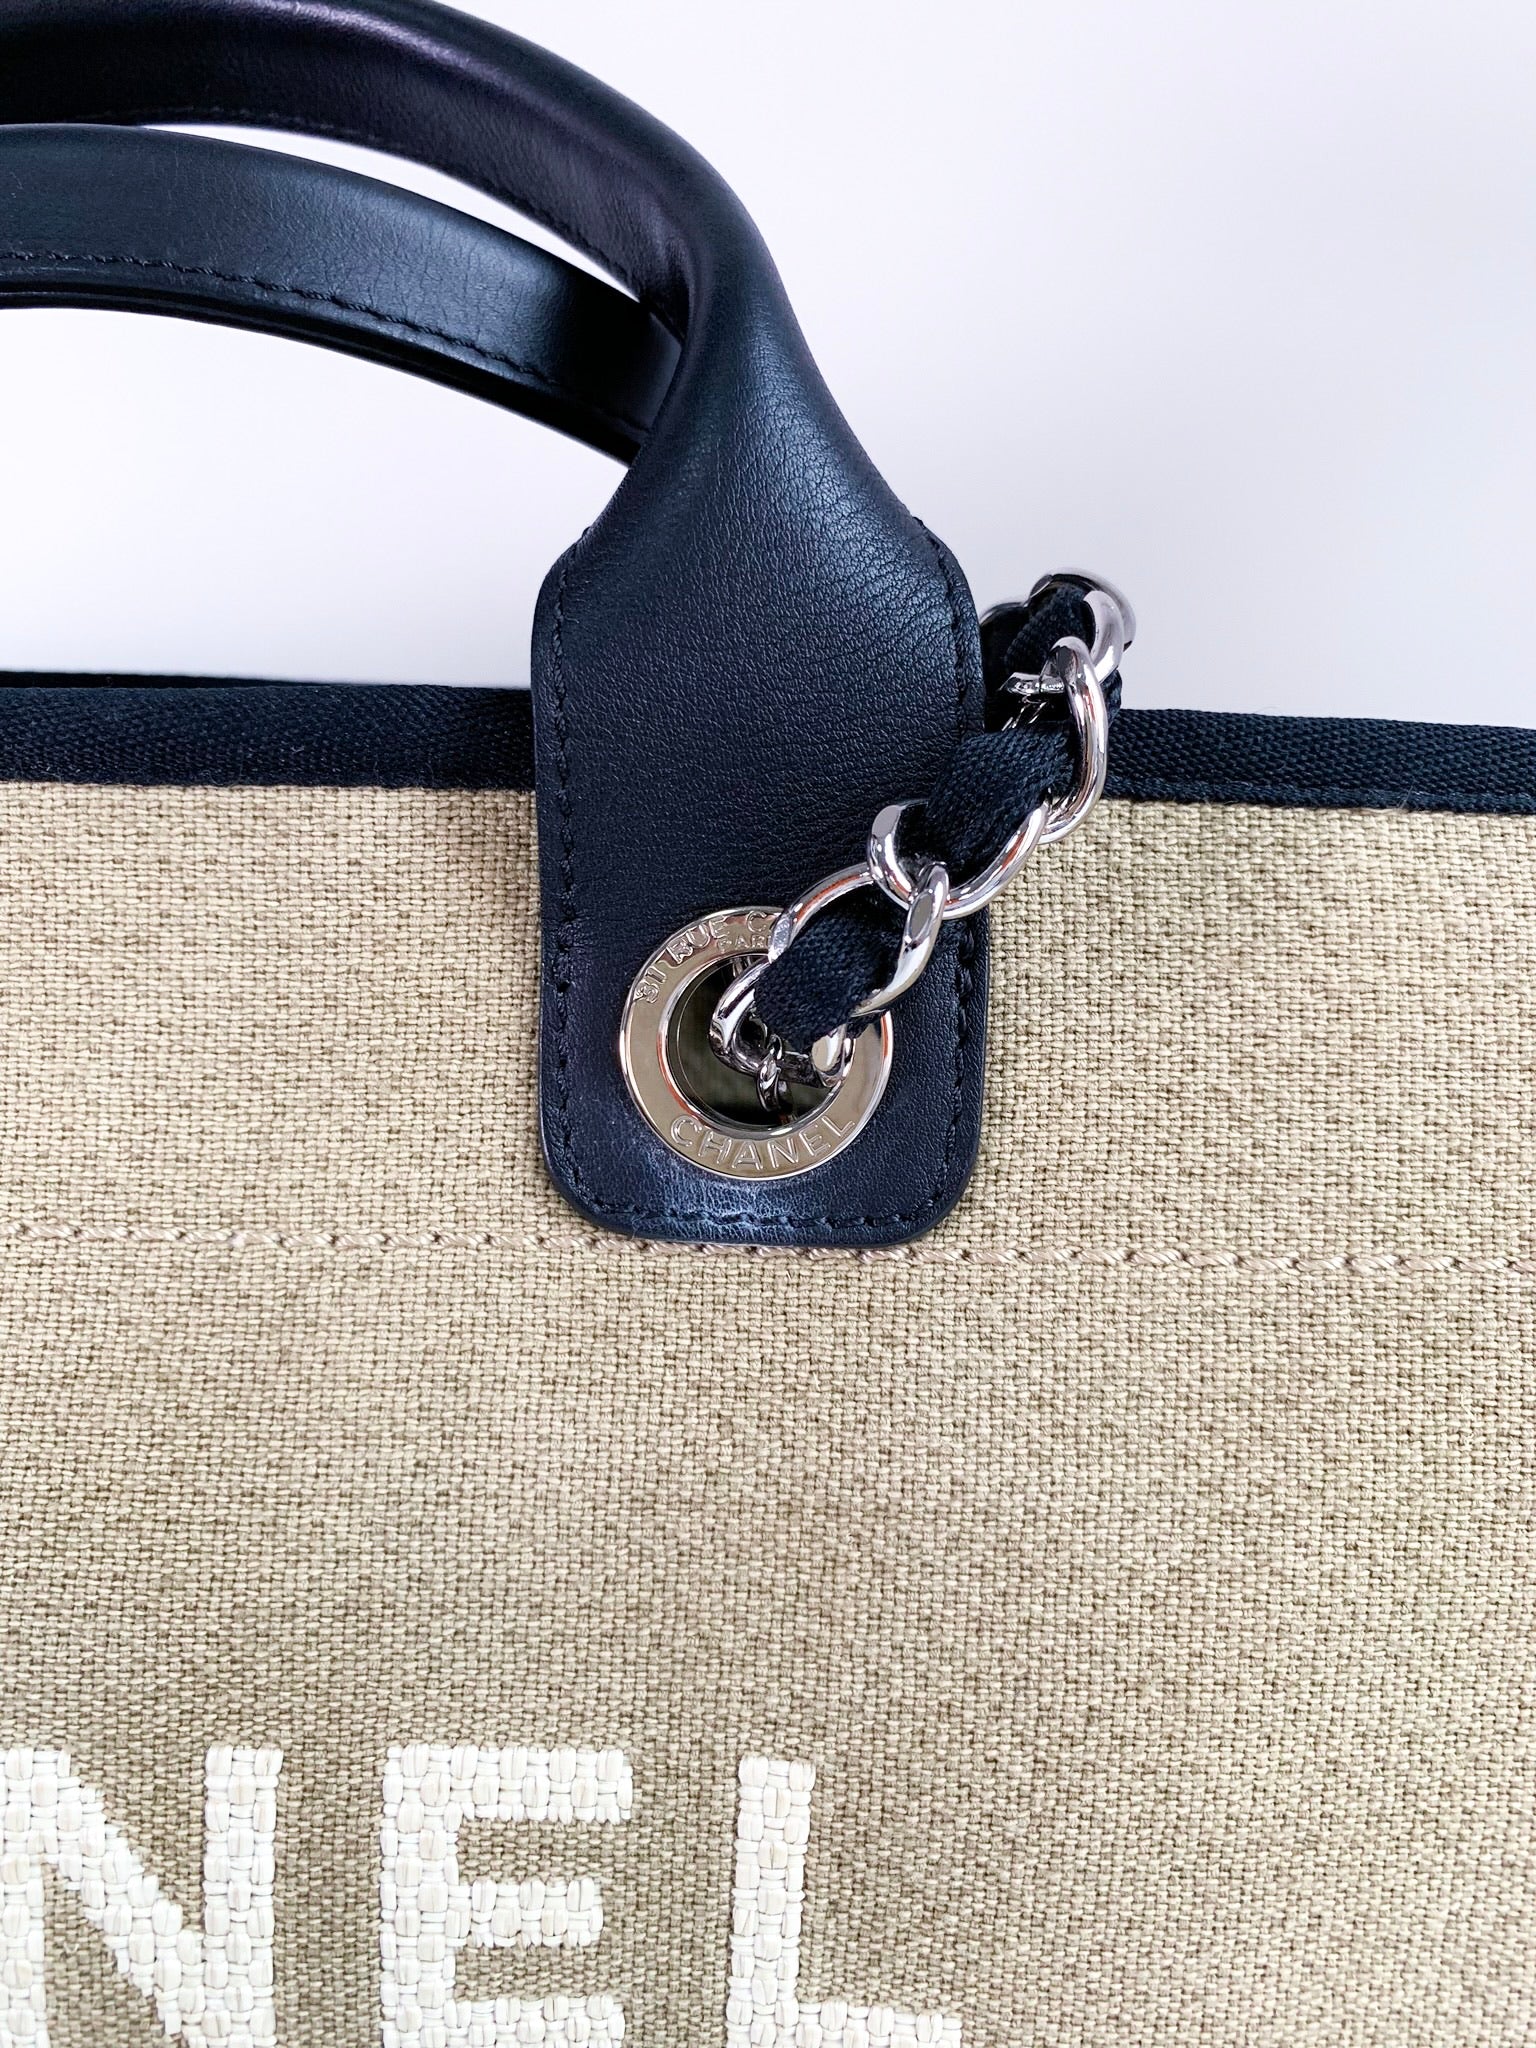 Chanel Deauville Tote Large, Black Canvas with Silver Hardware, Preowned in  Dustbag WA001 - Julia Rose Boston